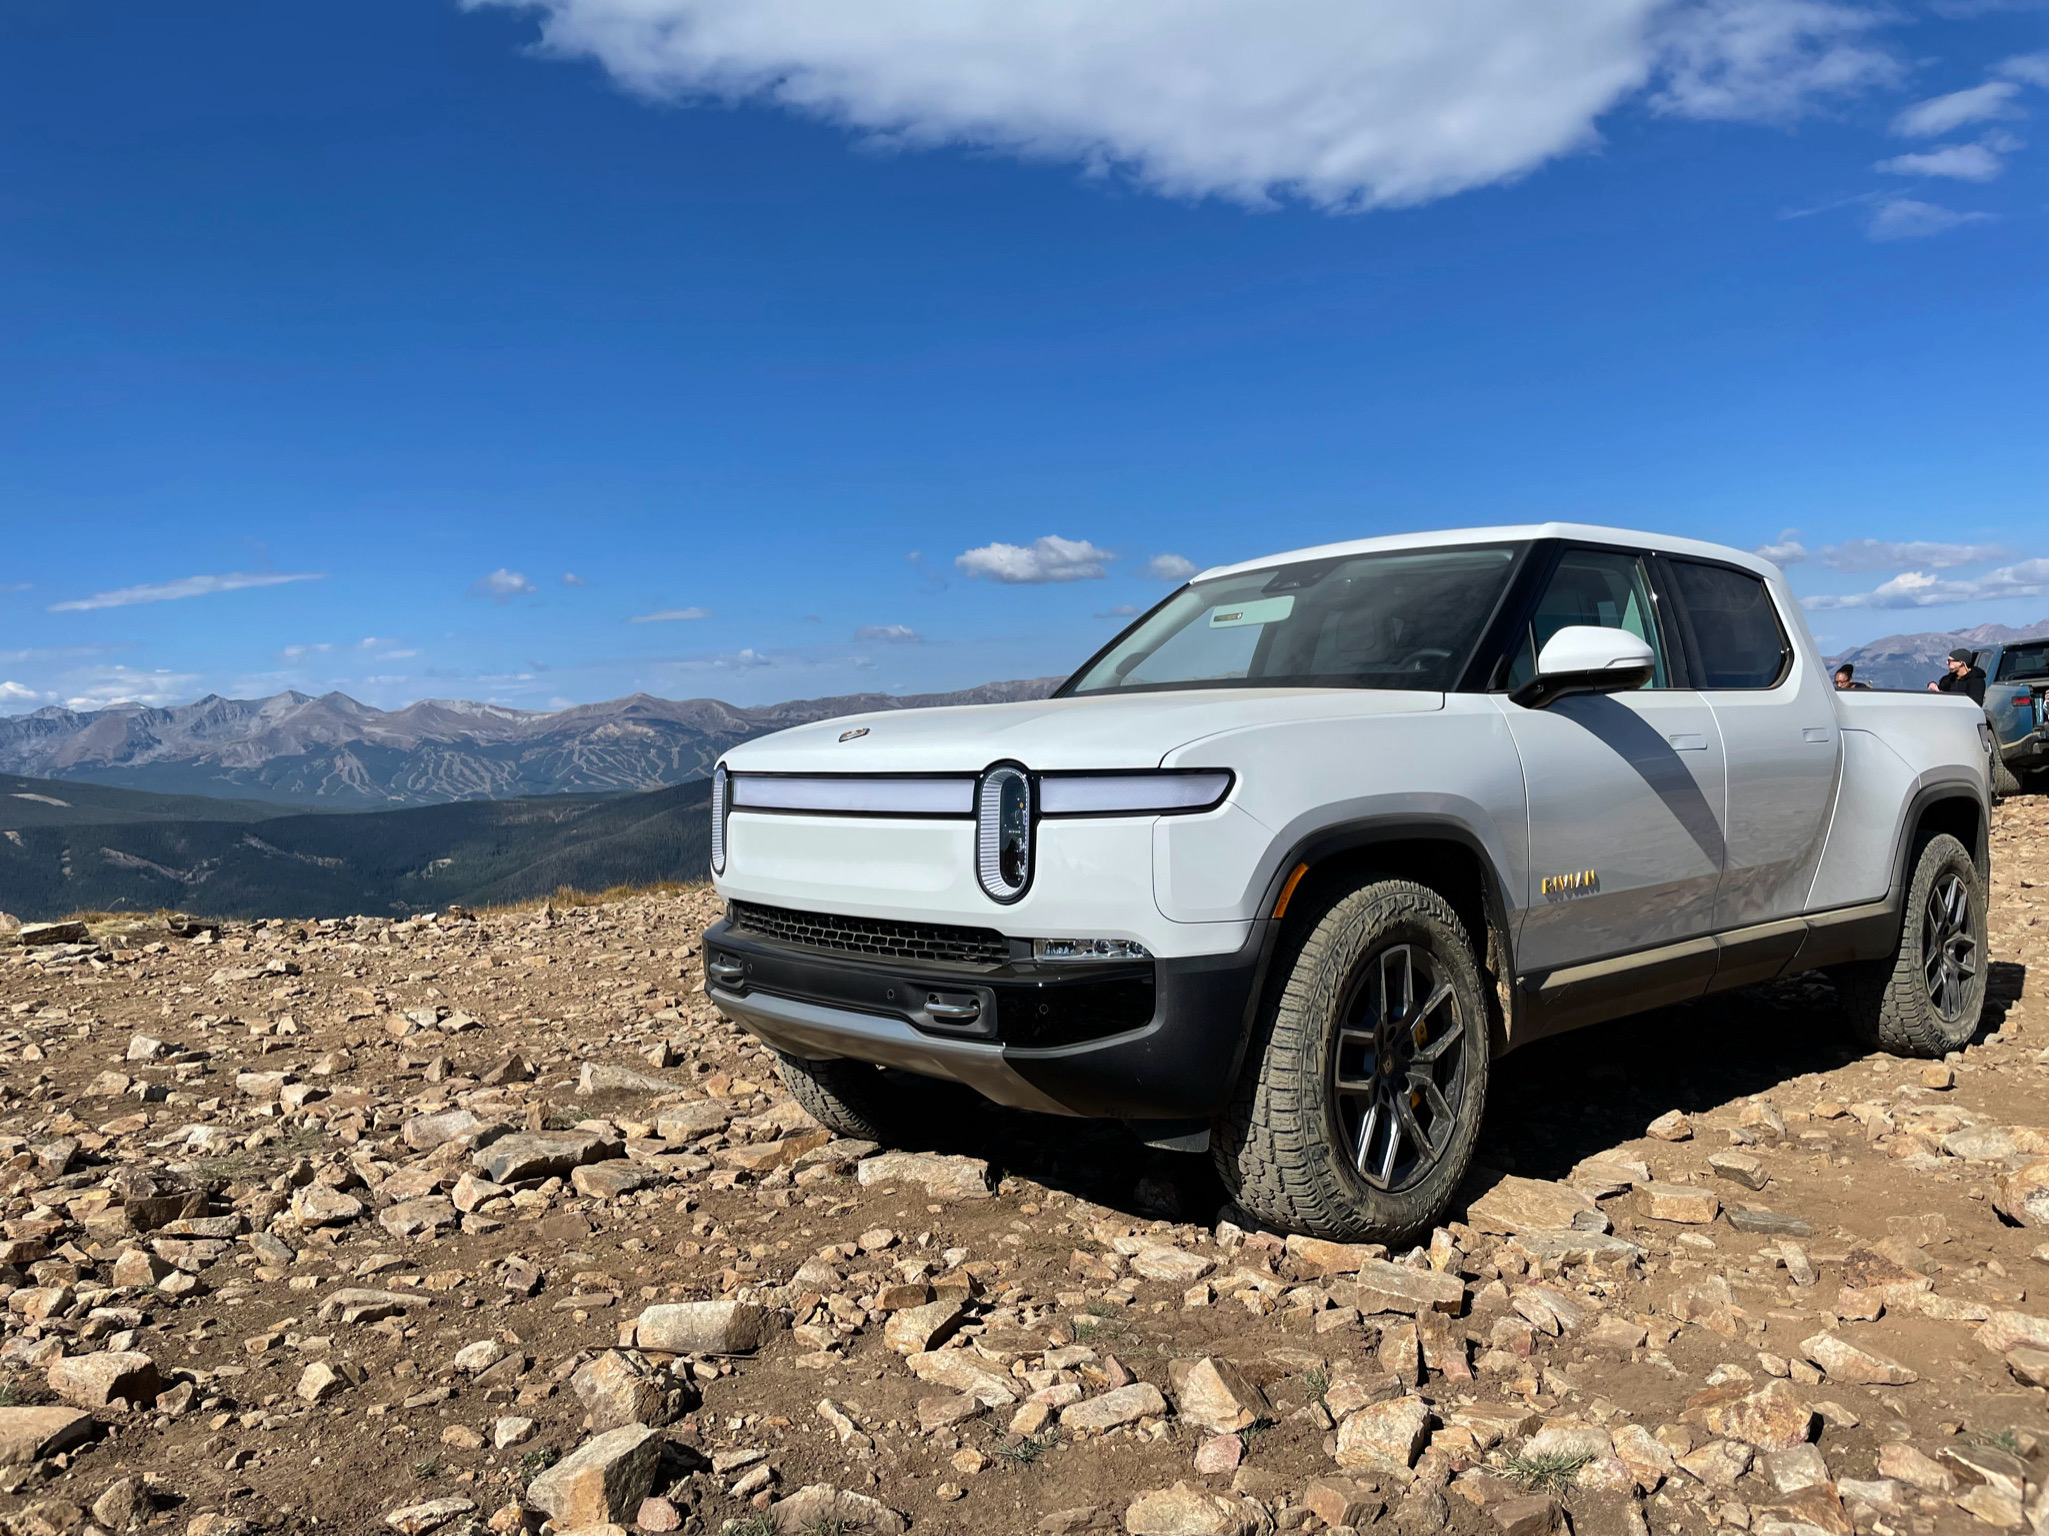 Rivian R1T Electric Pickup Truck Sighted in New England: Pre-order Customers Can Expect Delivery Soon!